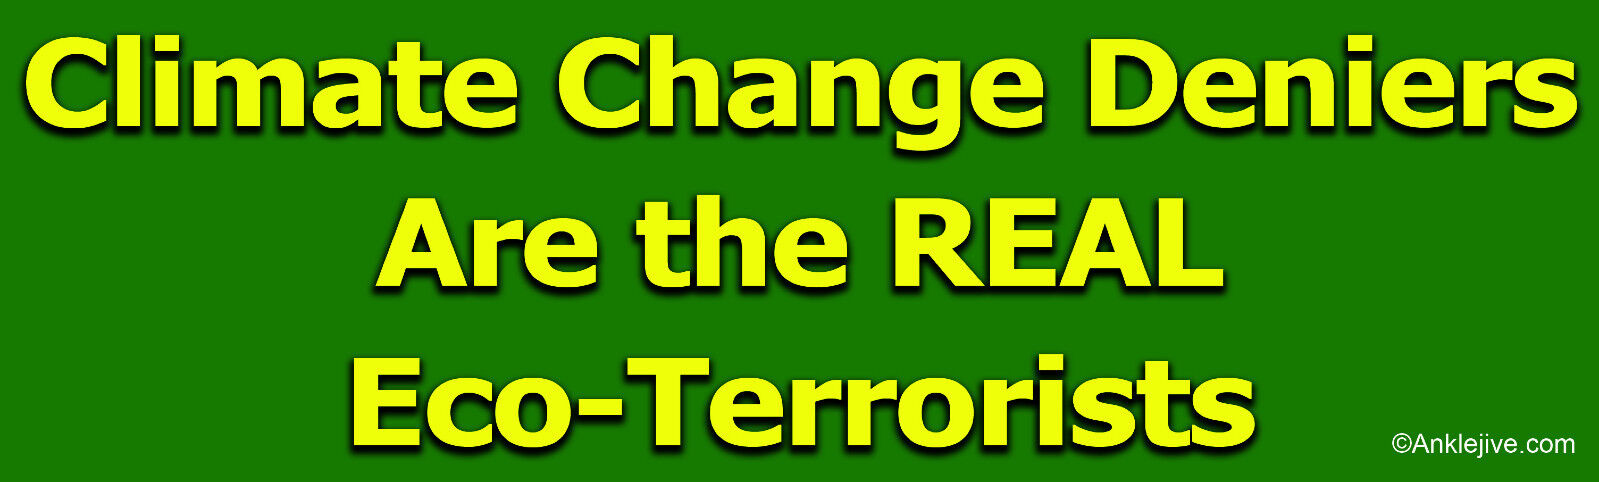 Climate Change Deniers Are The Real Eco-Terrorists Laptop/Window/Bumper Sticker